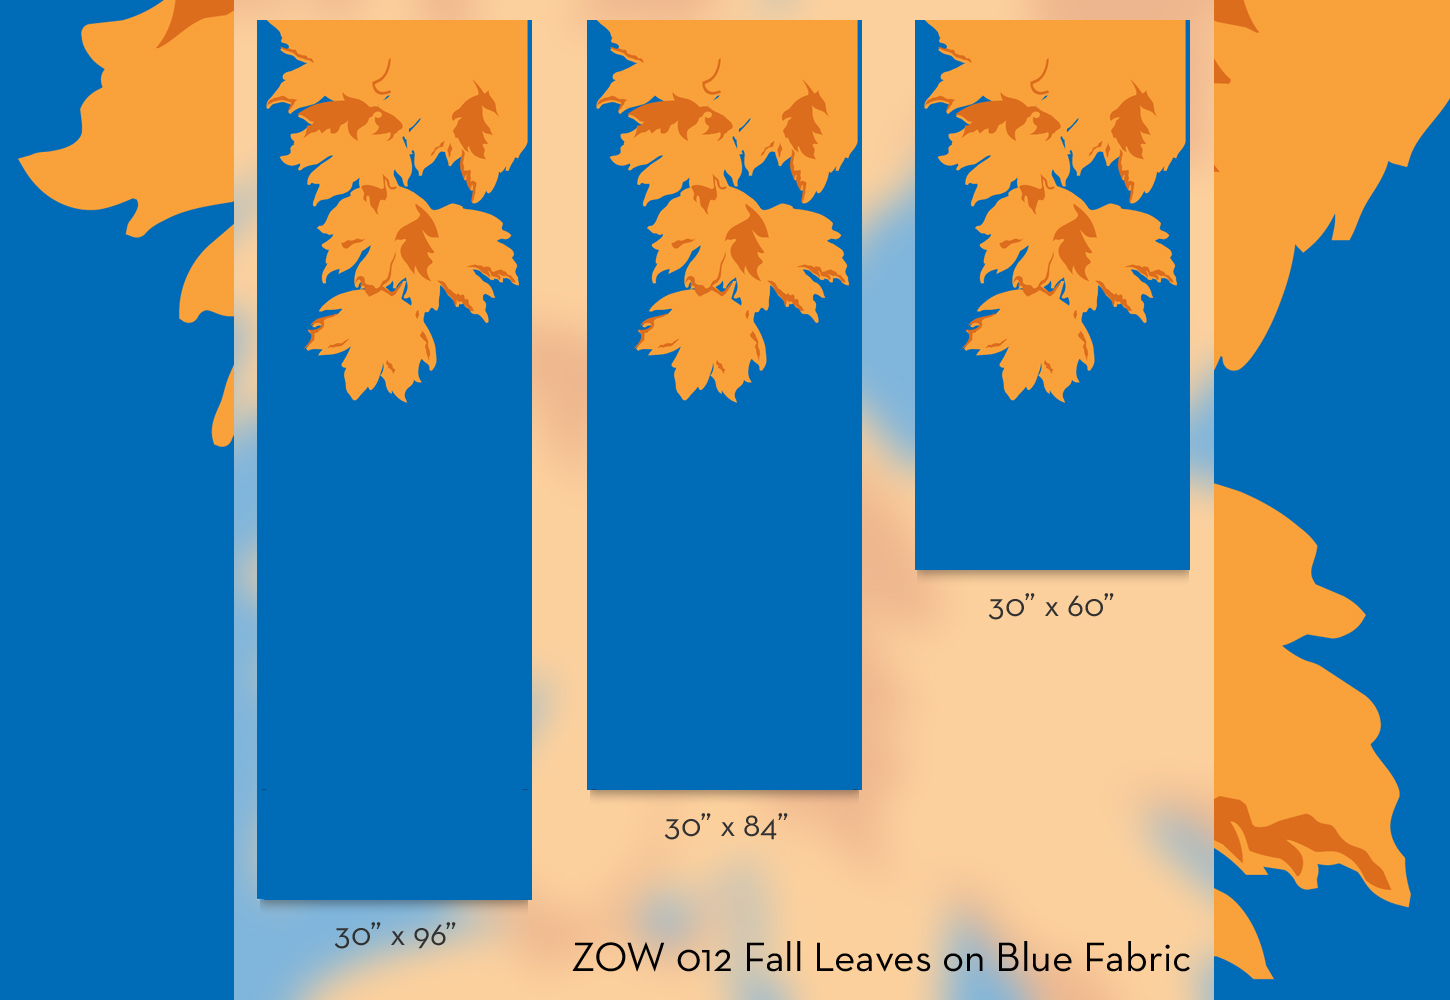 ZOW 012 Fall Leaves on Blue Fabric